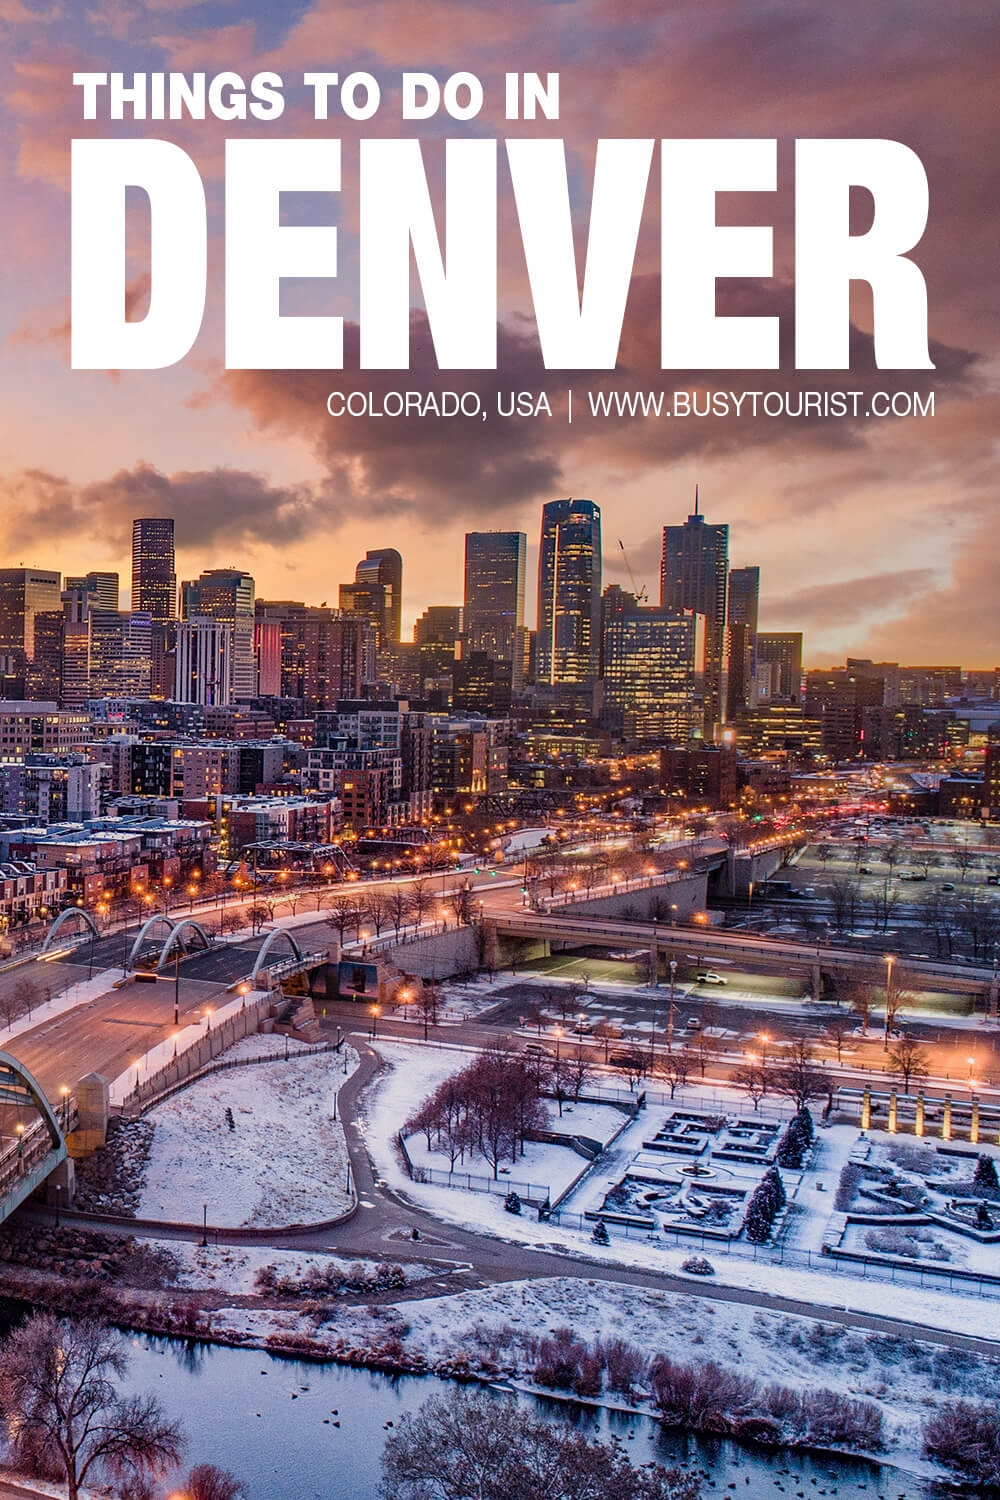 30 Fun Things To Do In Denver (Colorado) Attractions & Activities